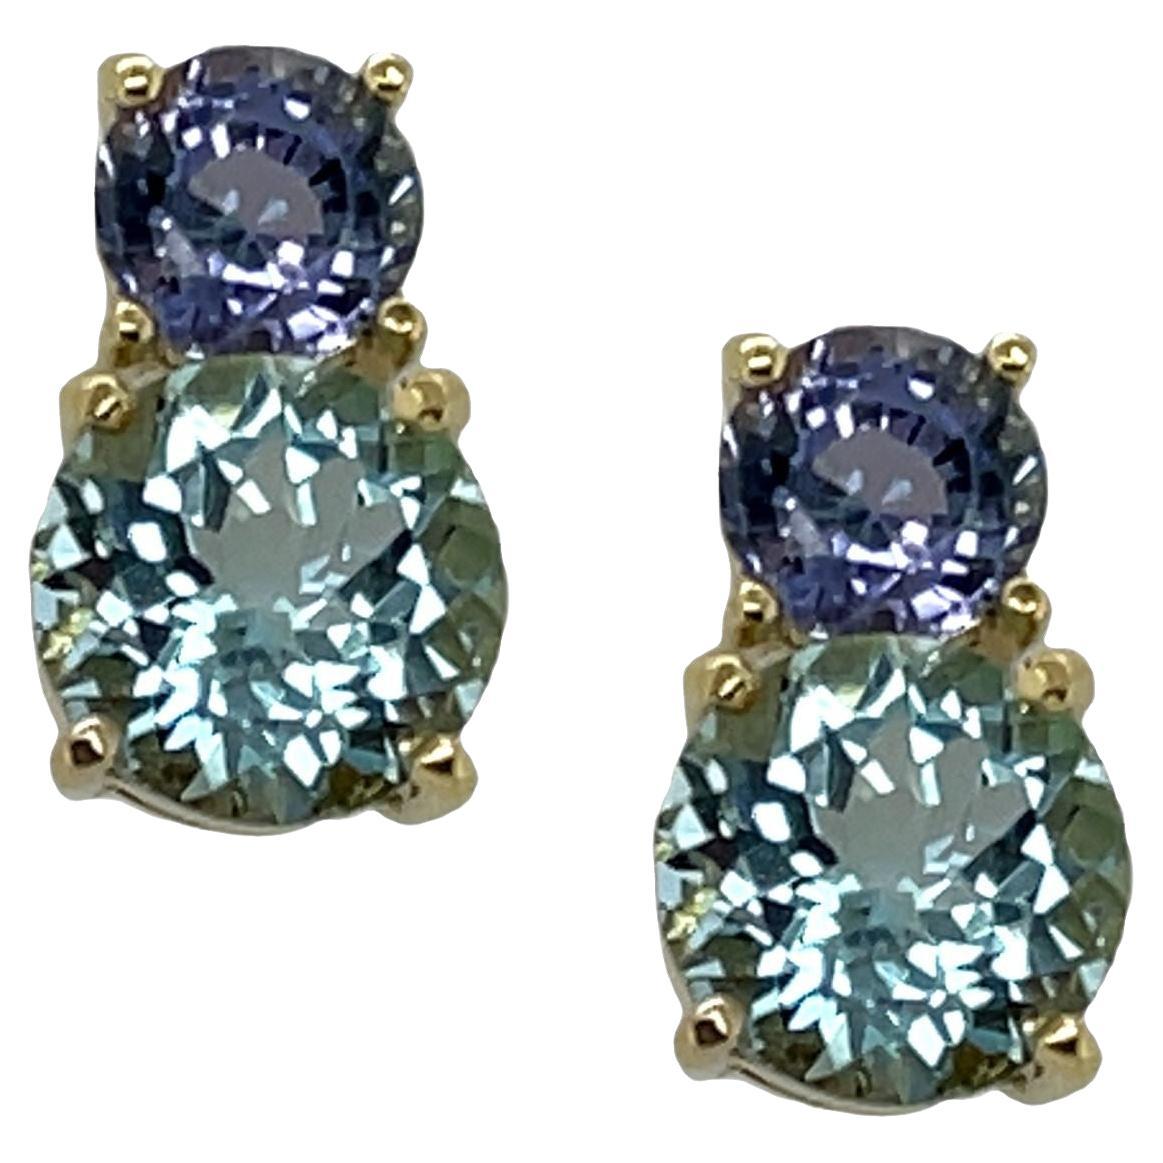 Cool, sparkling gems in warm 18k yellow gold - this beautiful combination of colors is designed to please the eye and delight the senses! Sparkling blue aquamarines weighing over a carat and a half each are paired with brilliant lavender tanzanites